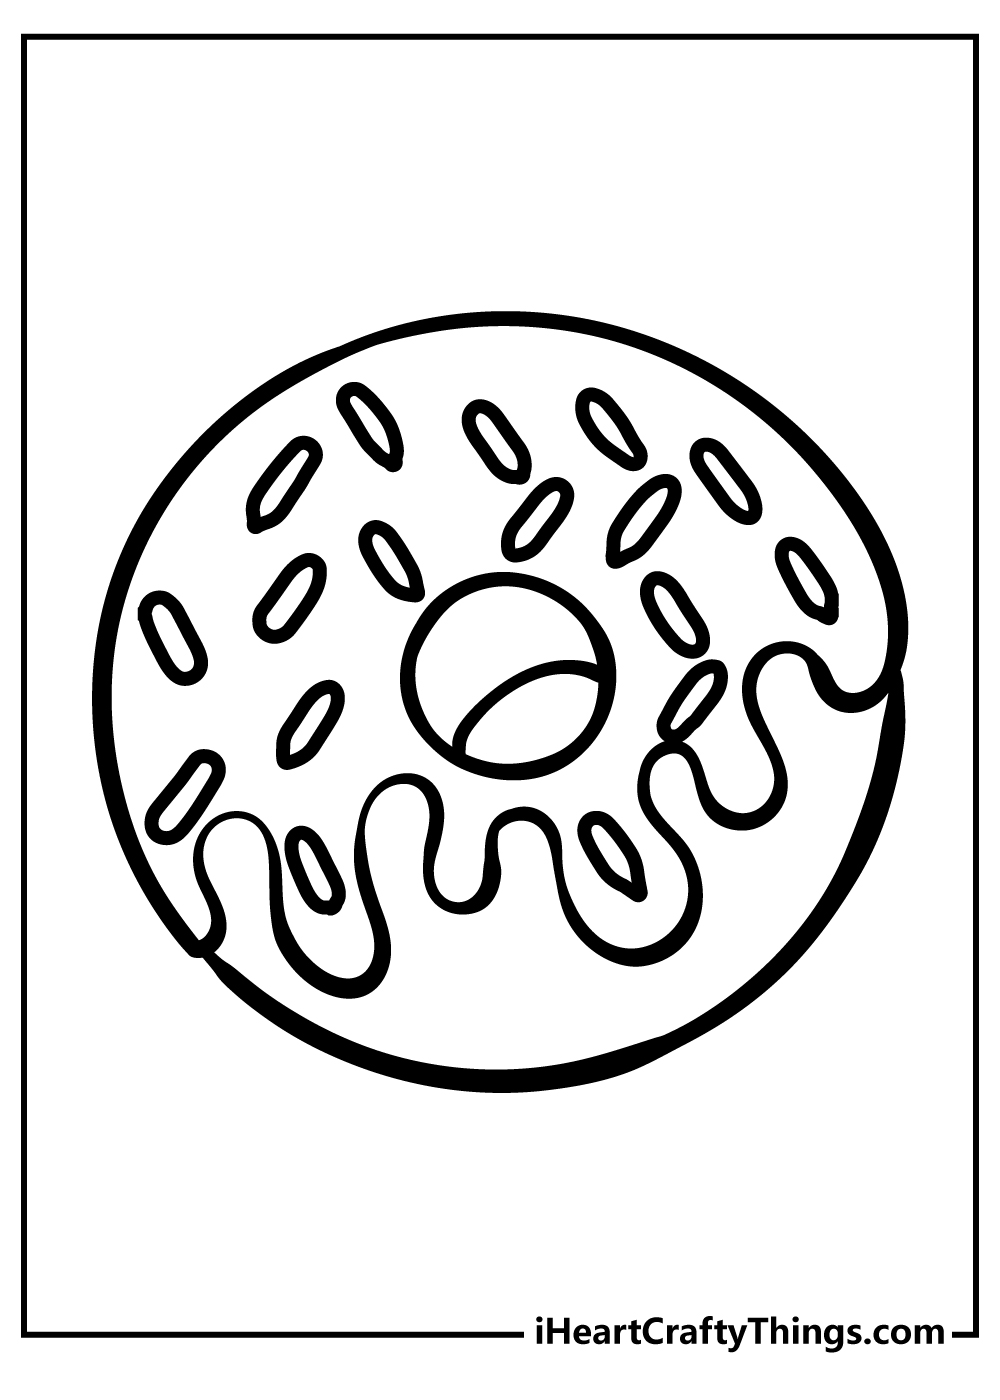 Donut Coloring Pages for kids free download